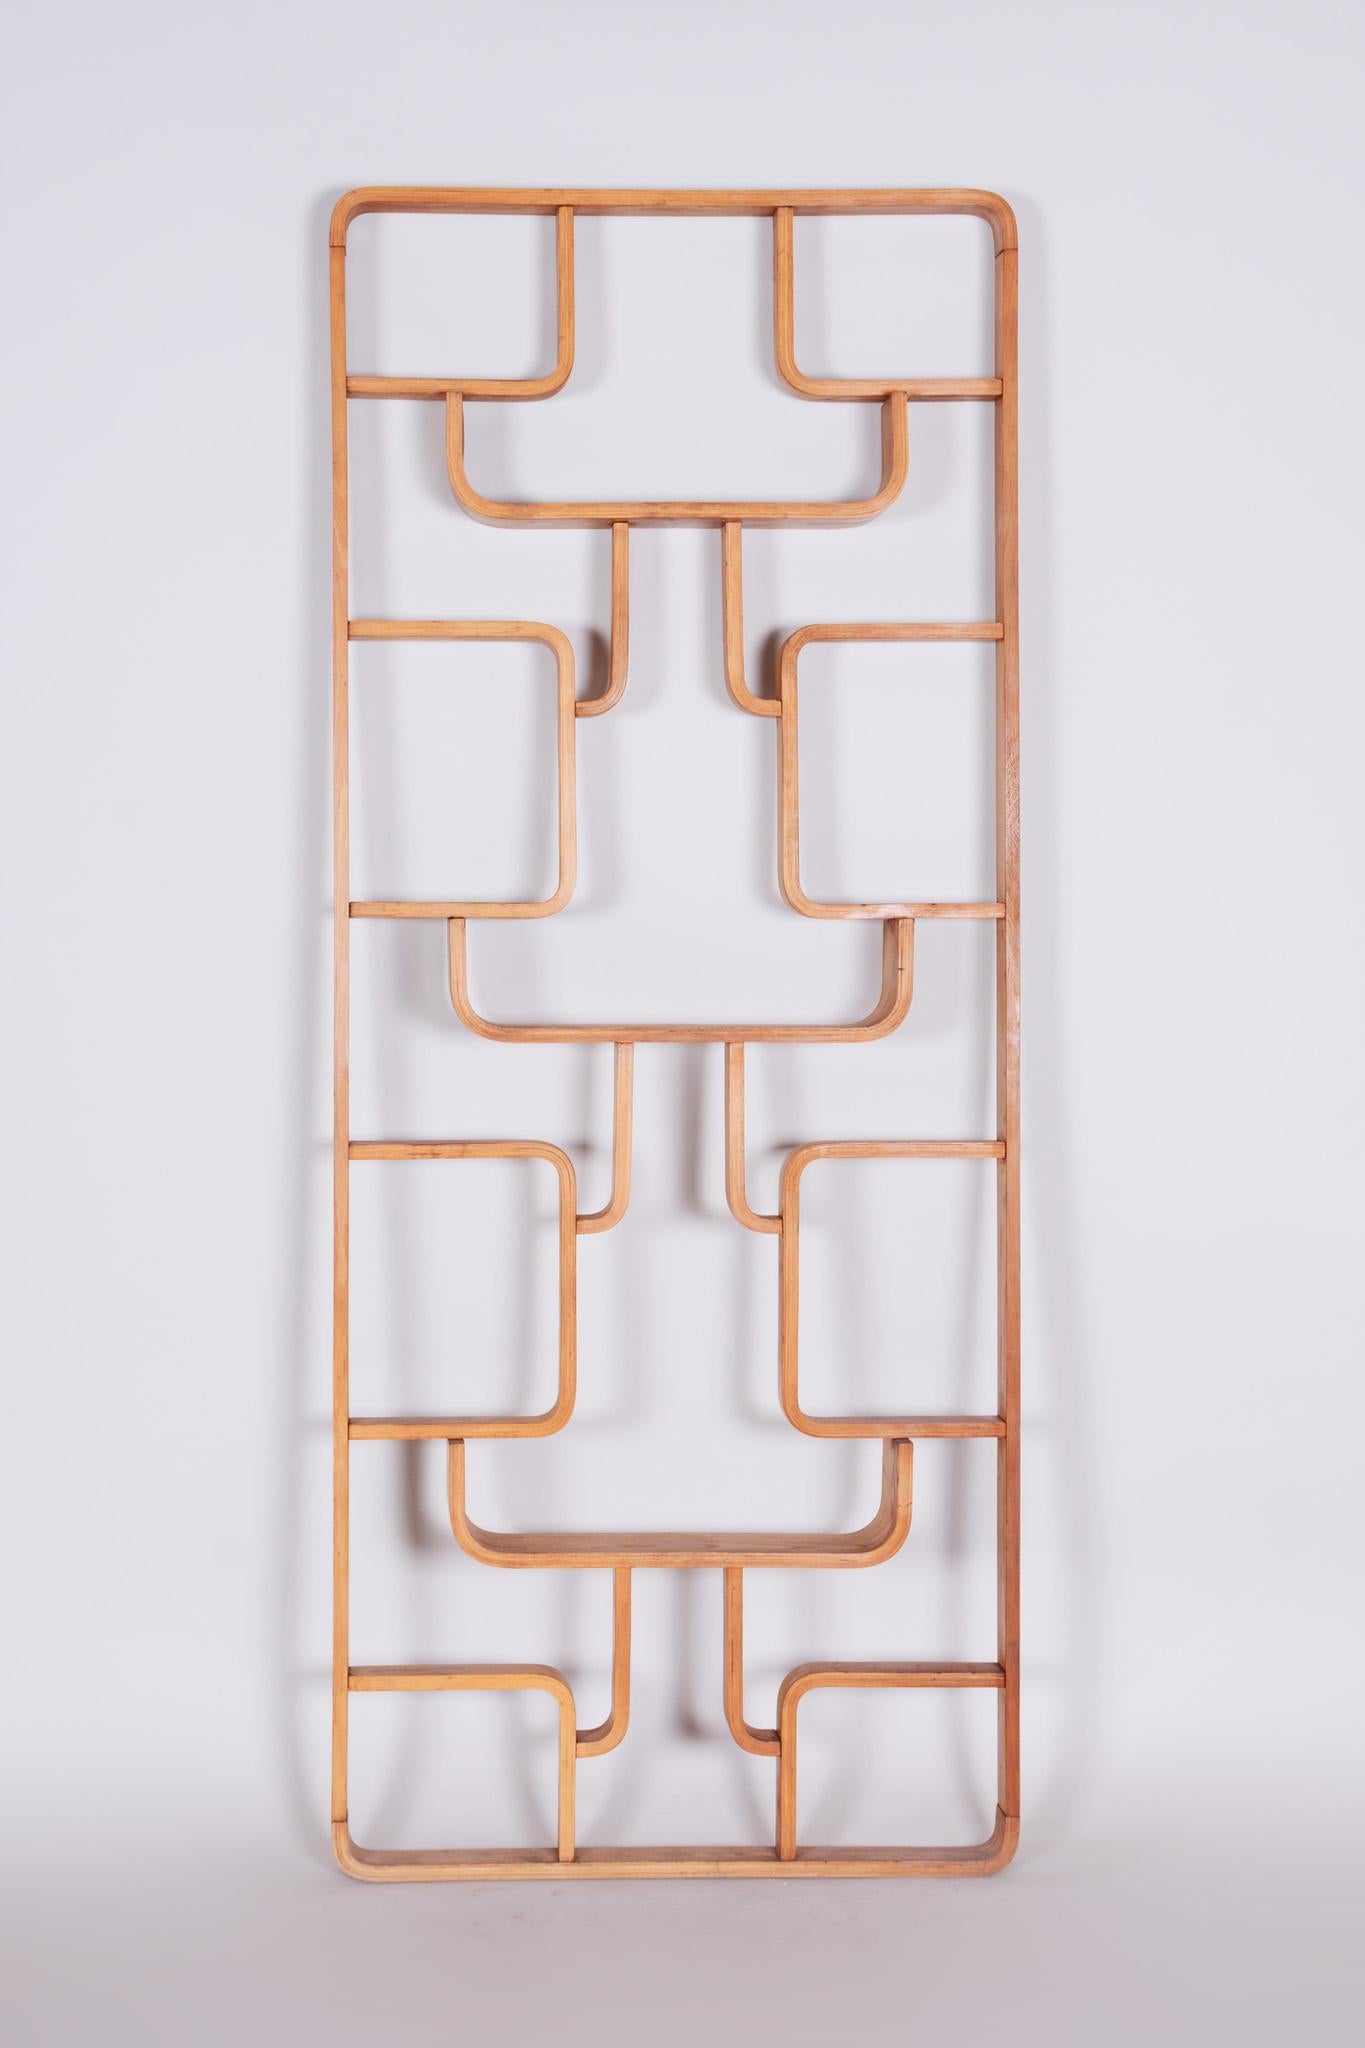 This room divider from the 1960s was designed by Ludvik Volak for Drevopodnik Holesov, in Czechoslovakia.

Material: Ash
Period: 1960-1969
Source: Czech
Designer: Ludvik Volak
Maker: Drevopodnik Holesov.